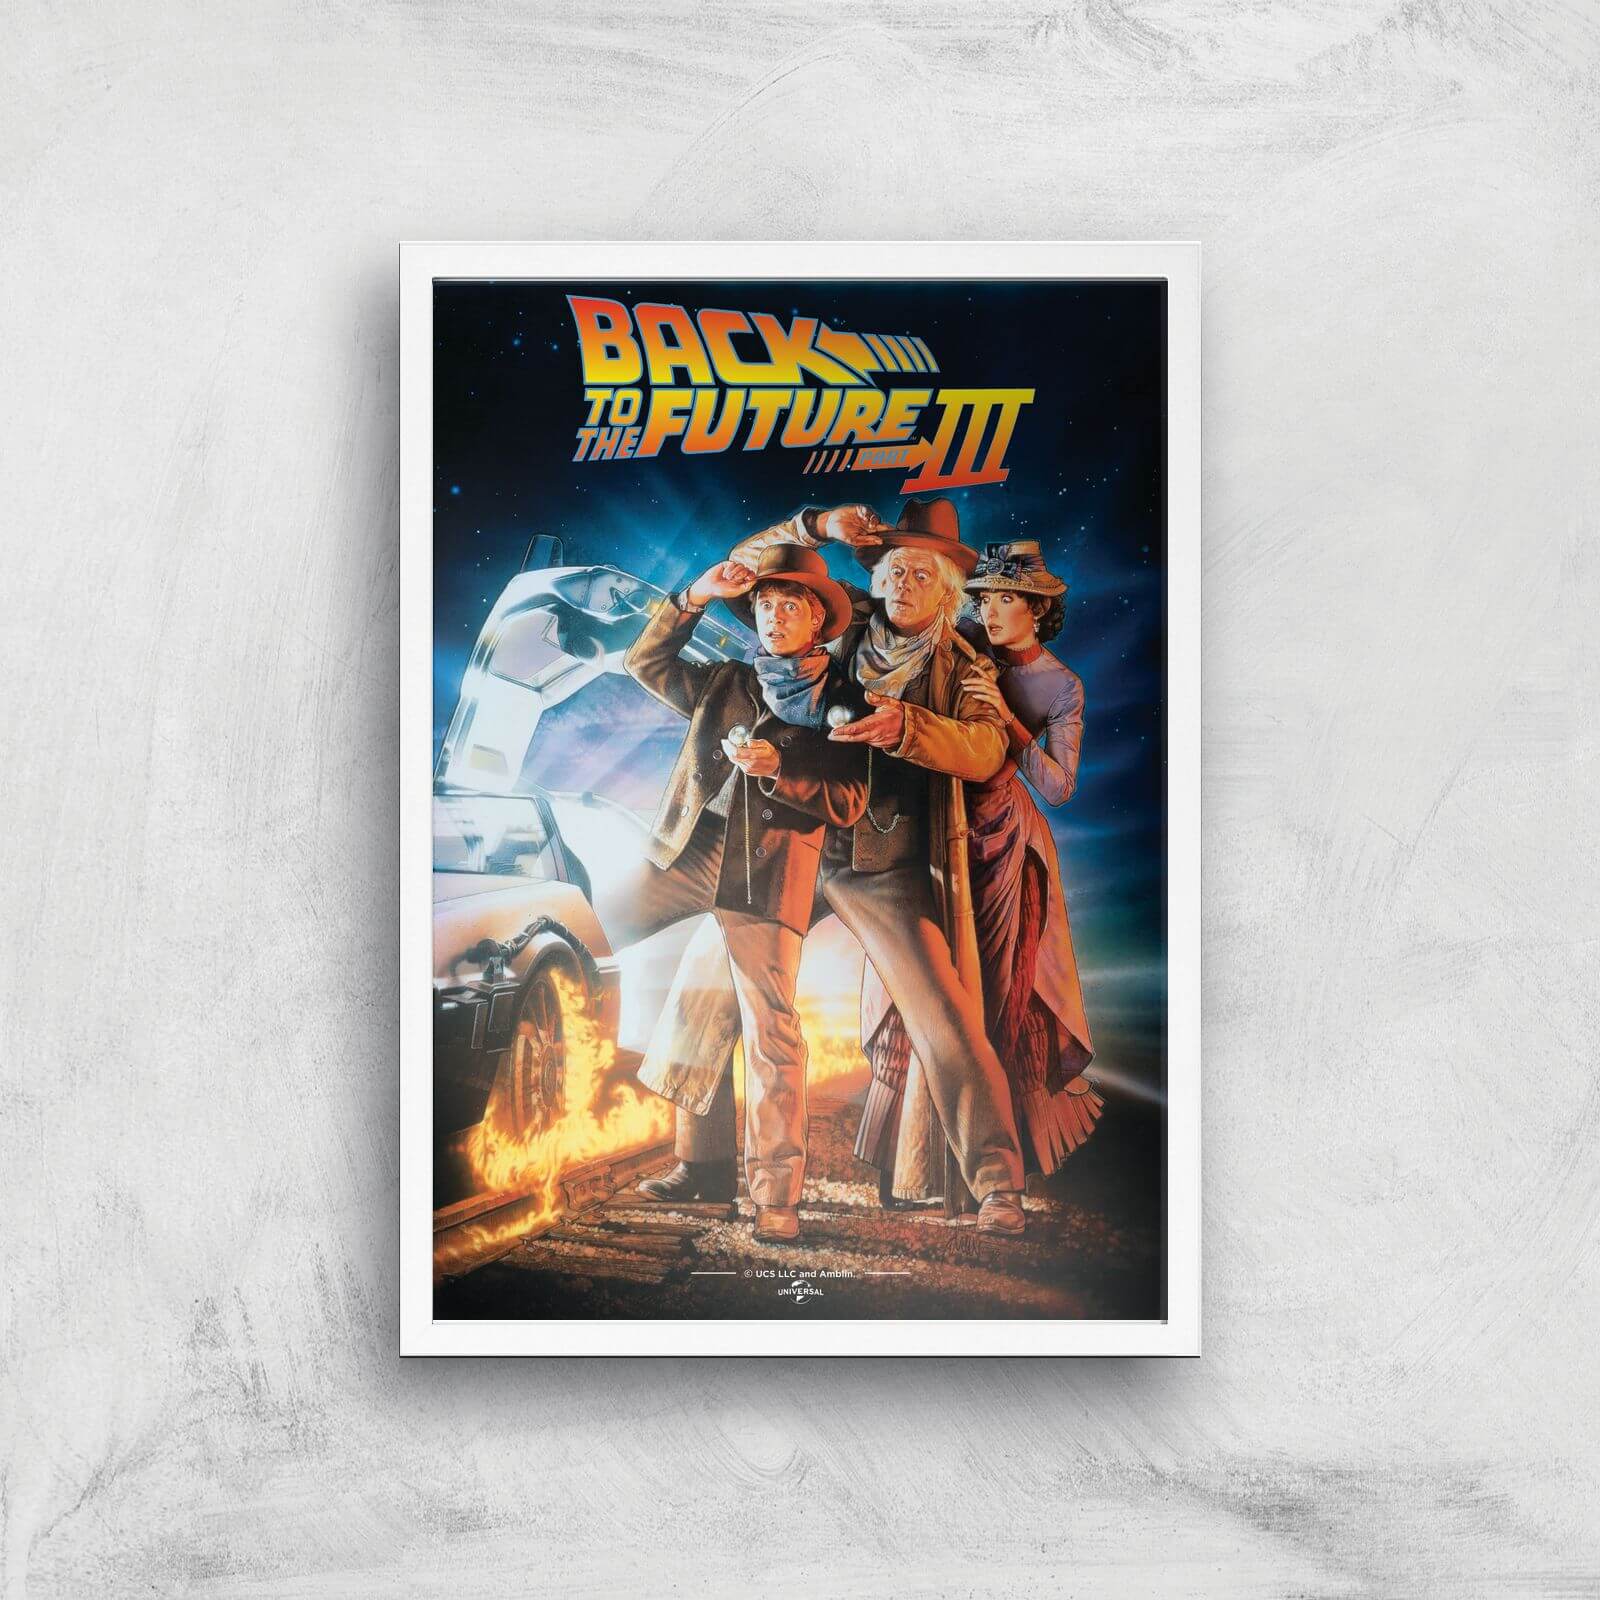 Back To The Future Part 3 Giclee Art Print - A3 - White Frame